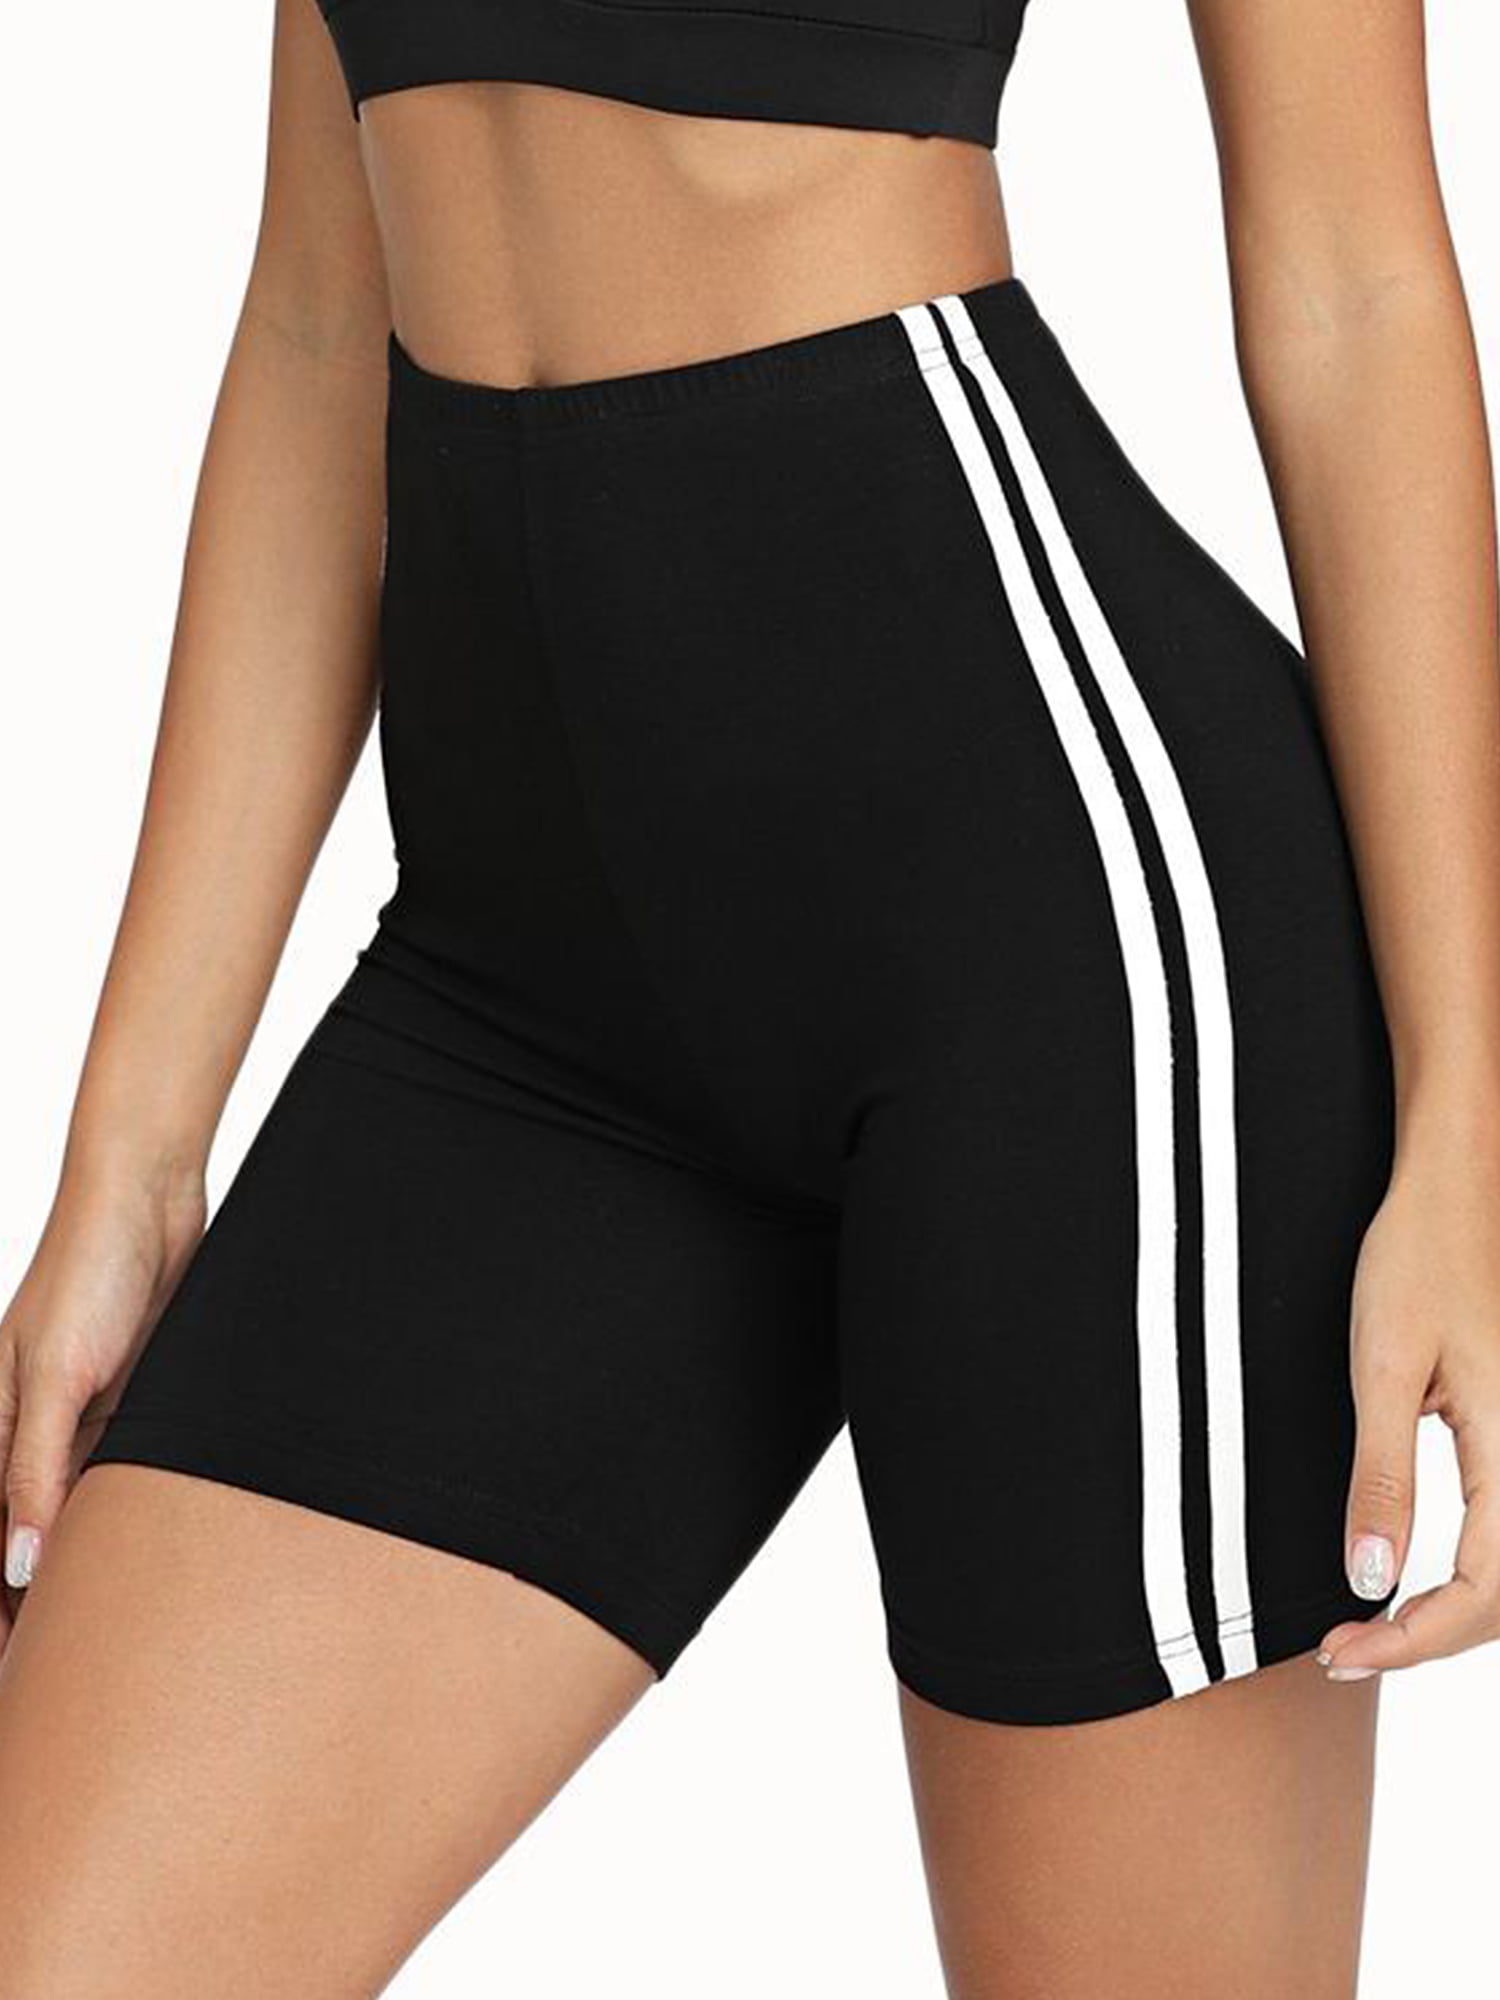 4HOW Womens 3 Inch Yoga Shorts Active Volleyball Gym Short Tights 